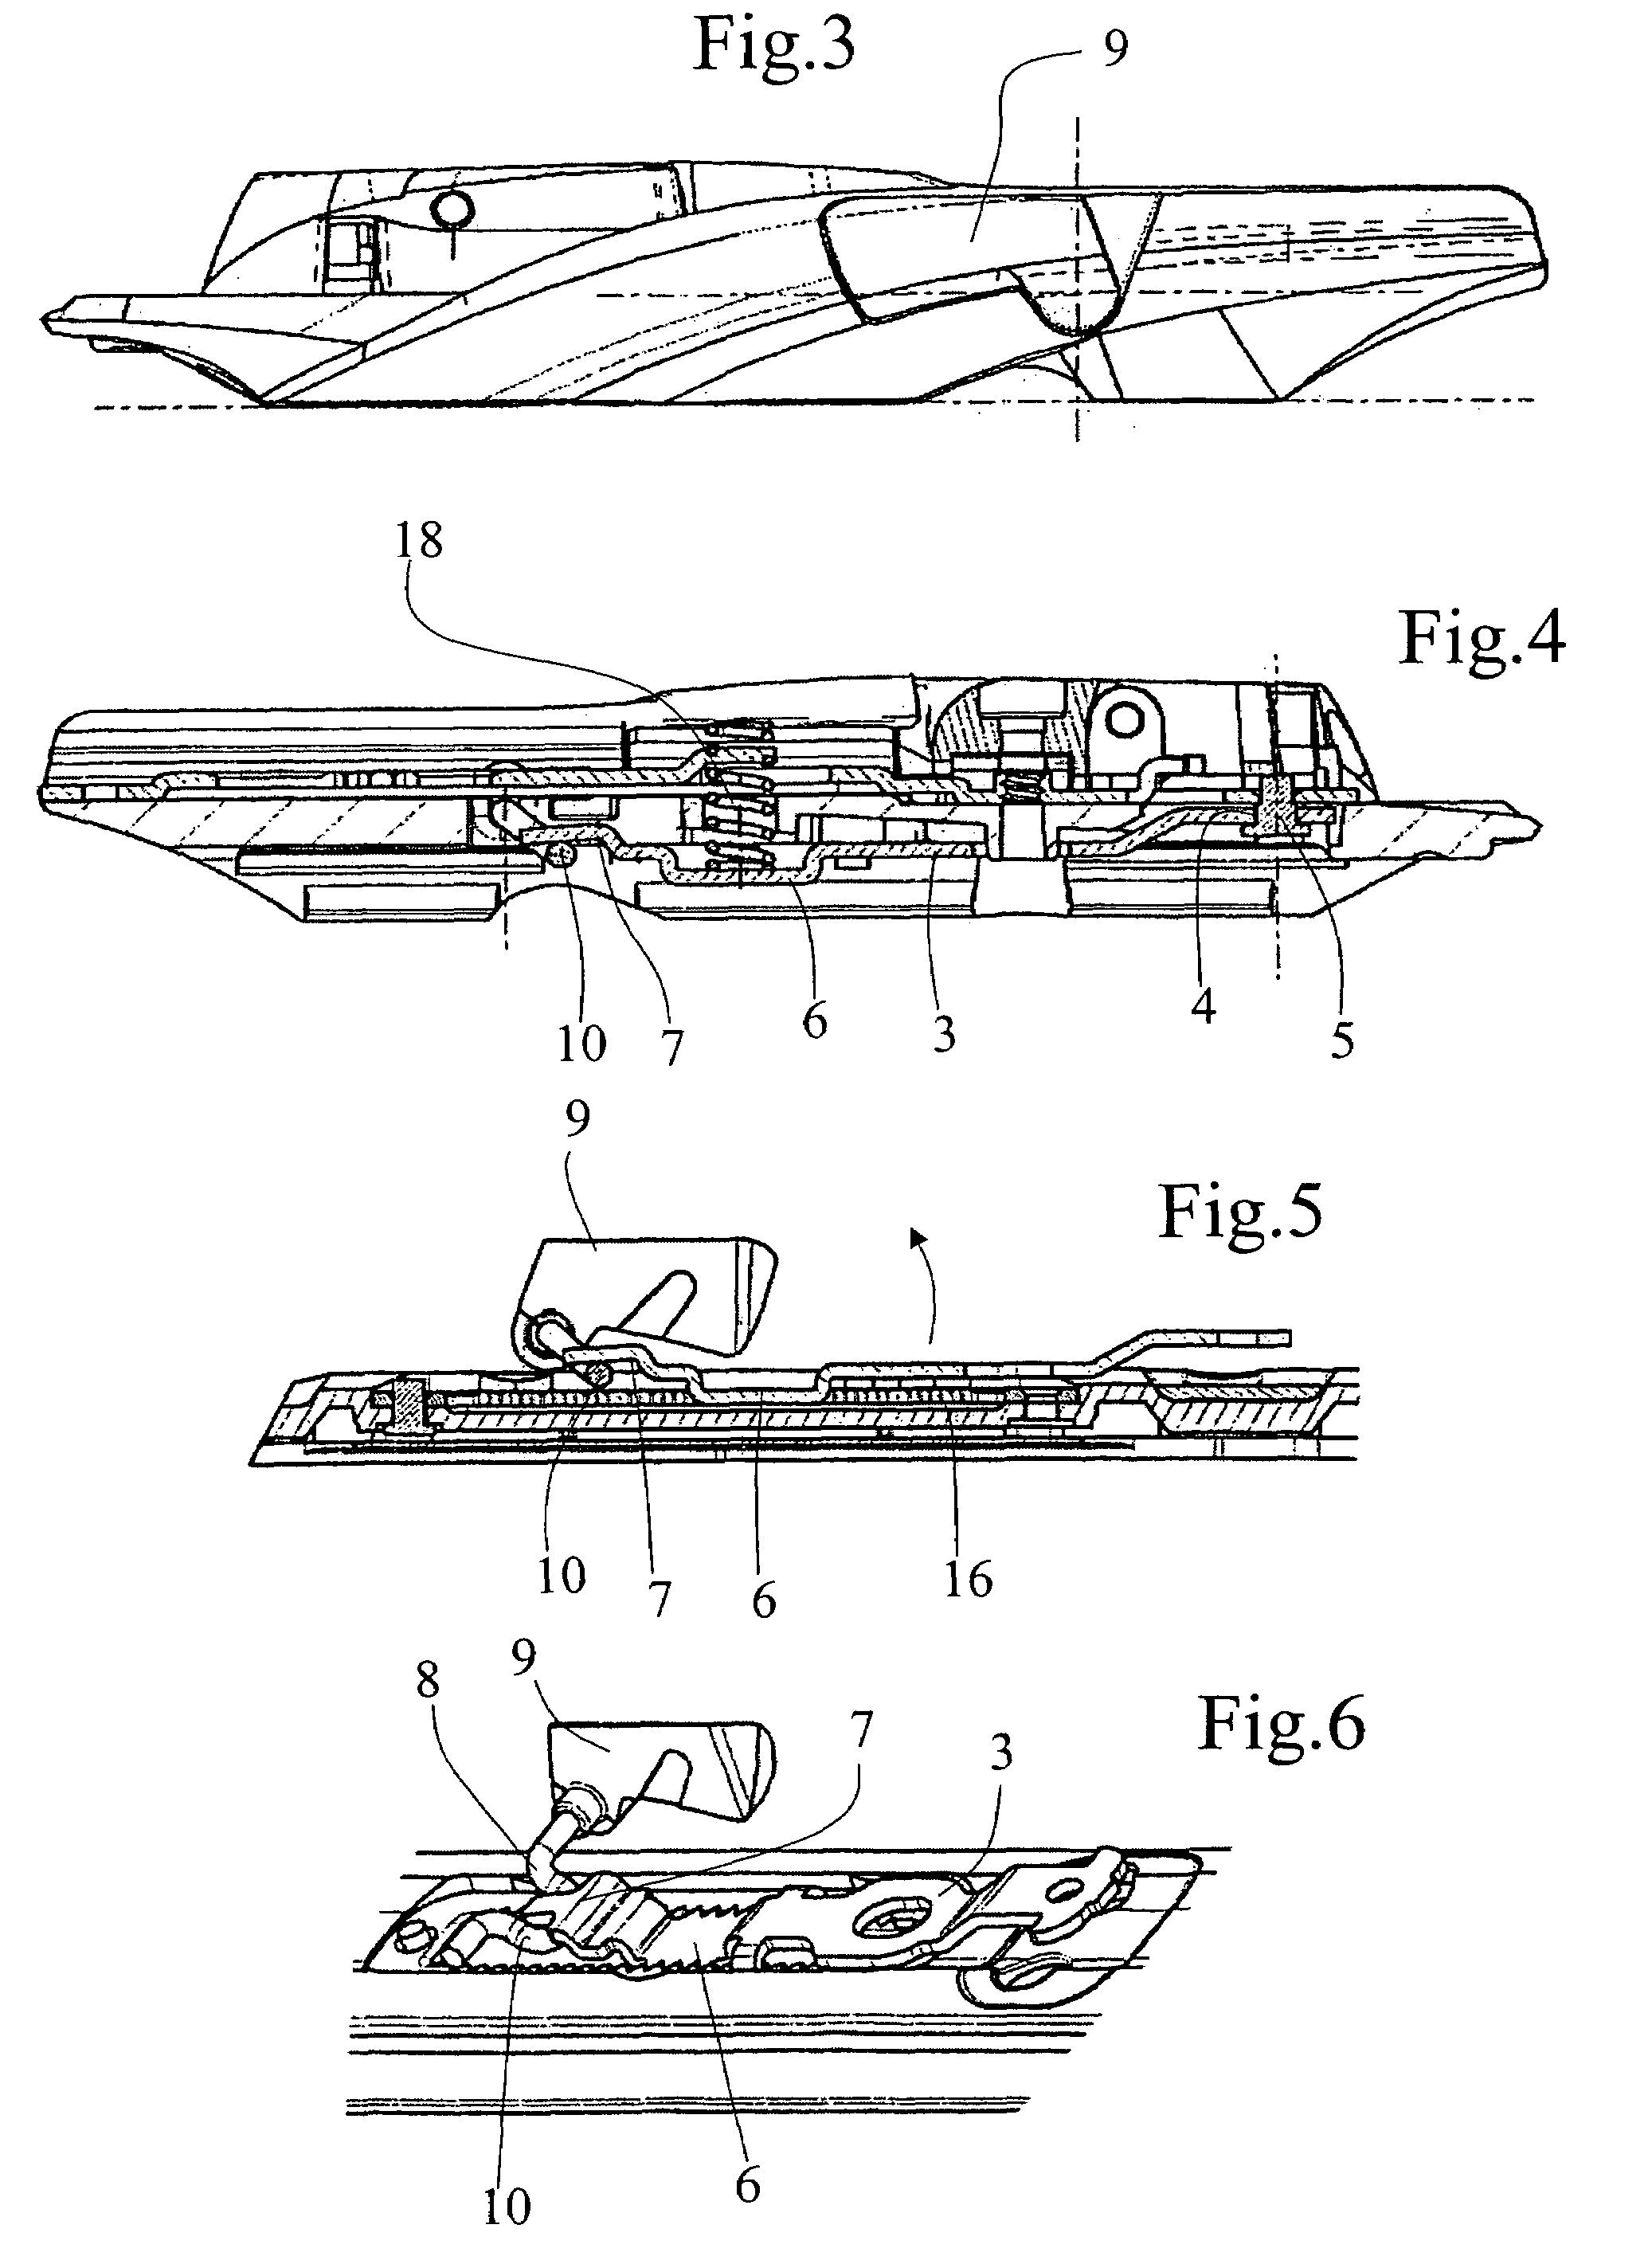 Adjustment device for an accessory such as a ski binding heelpiece